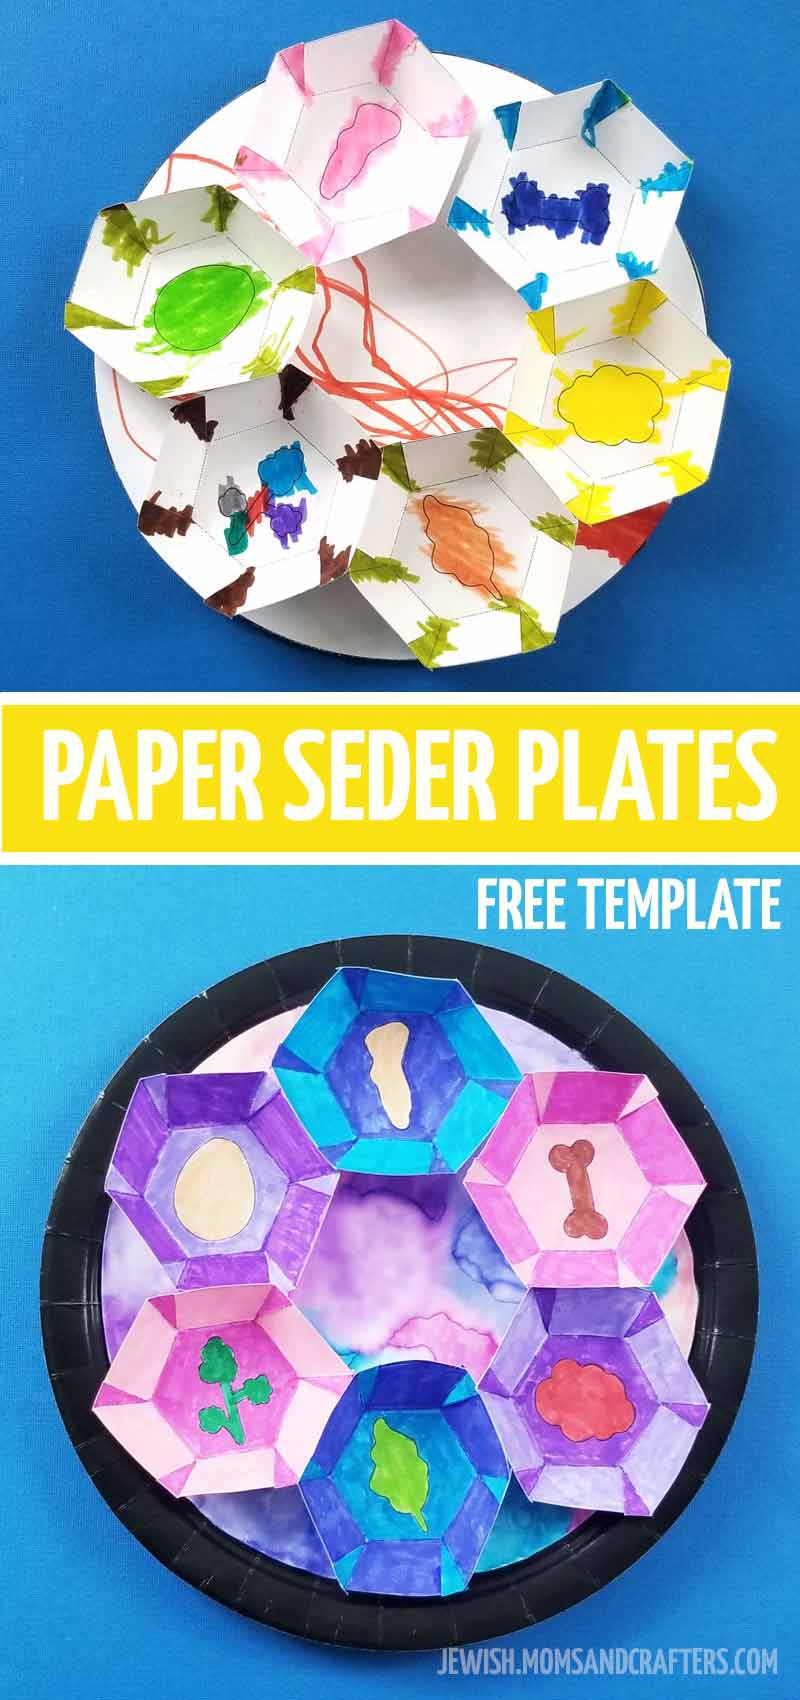 A fun Passover seder plate craft for kids! This adorable Preschool idea for Pesach or Passover includes a free printable and is a great activity for kids at home